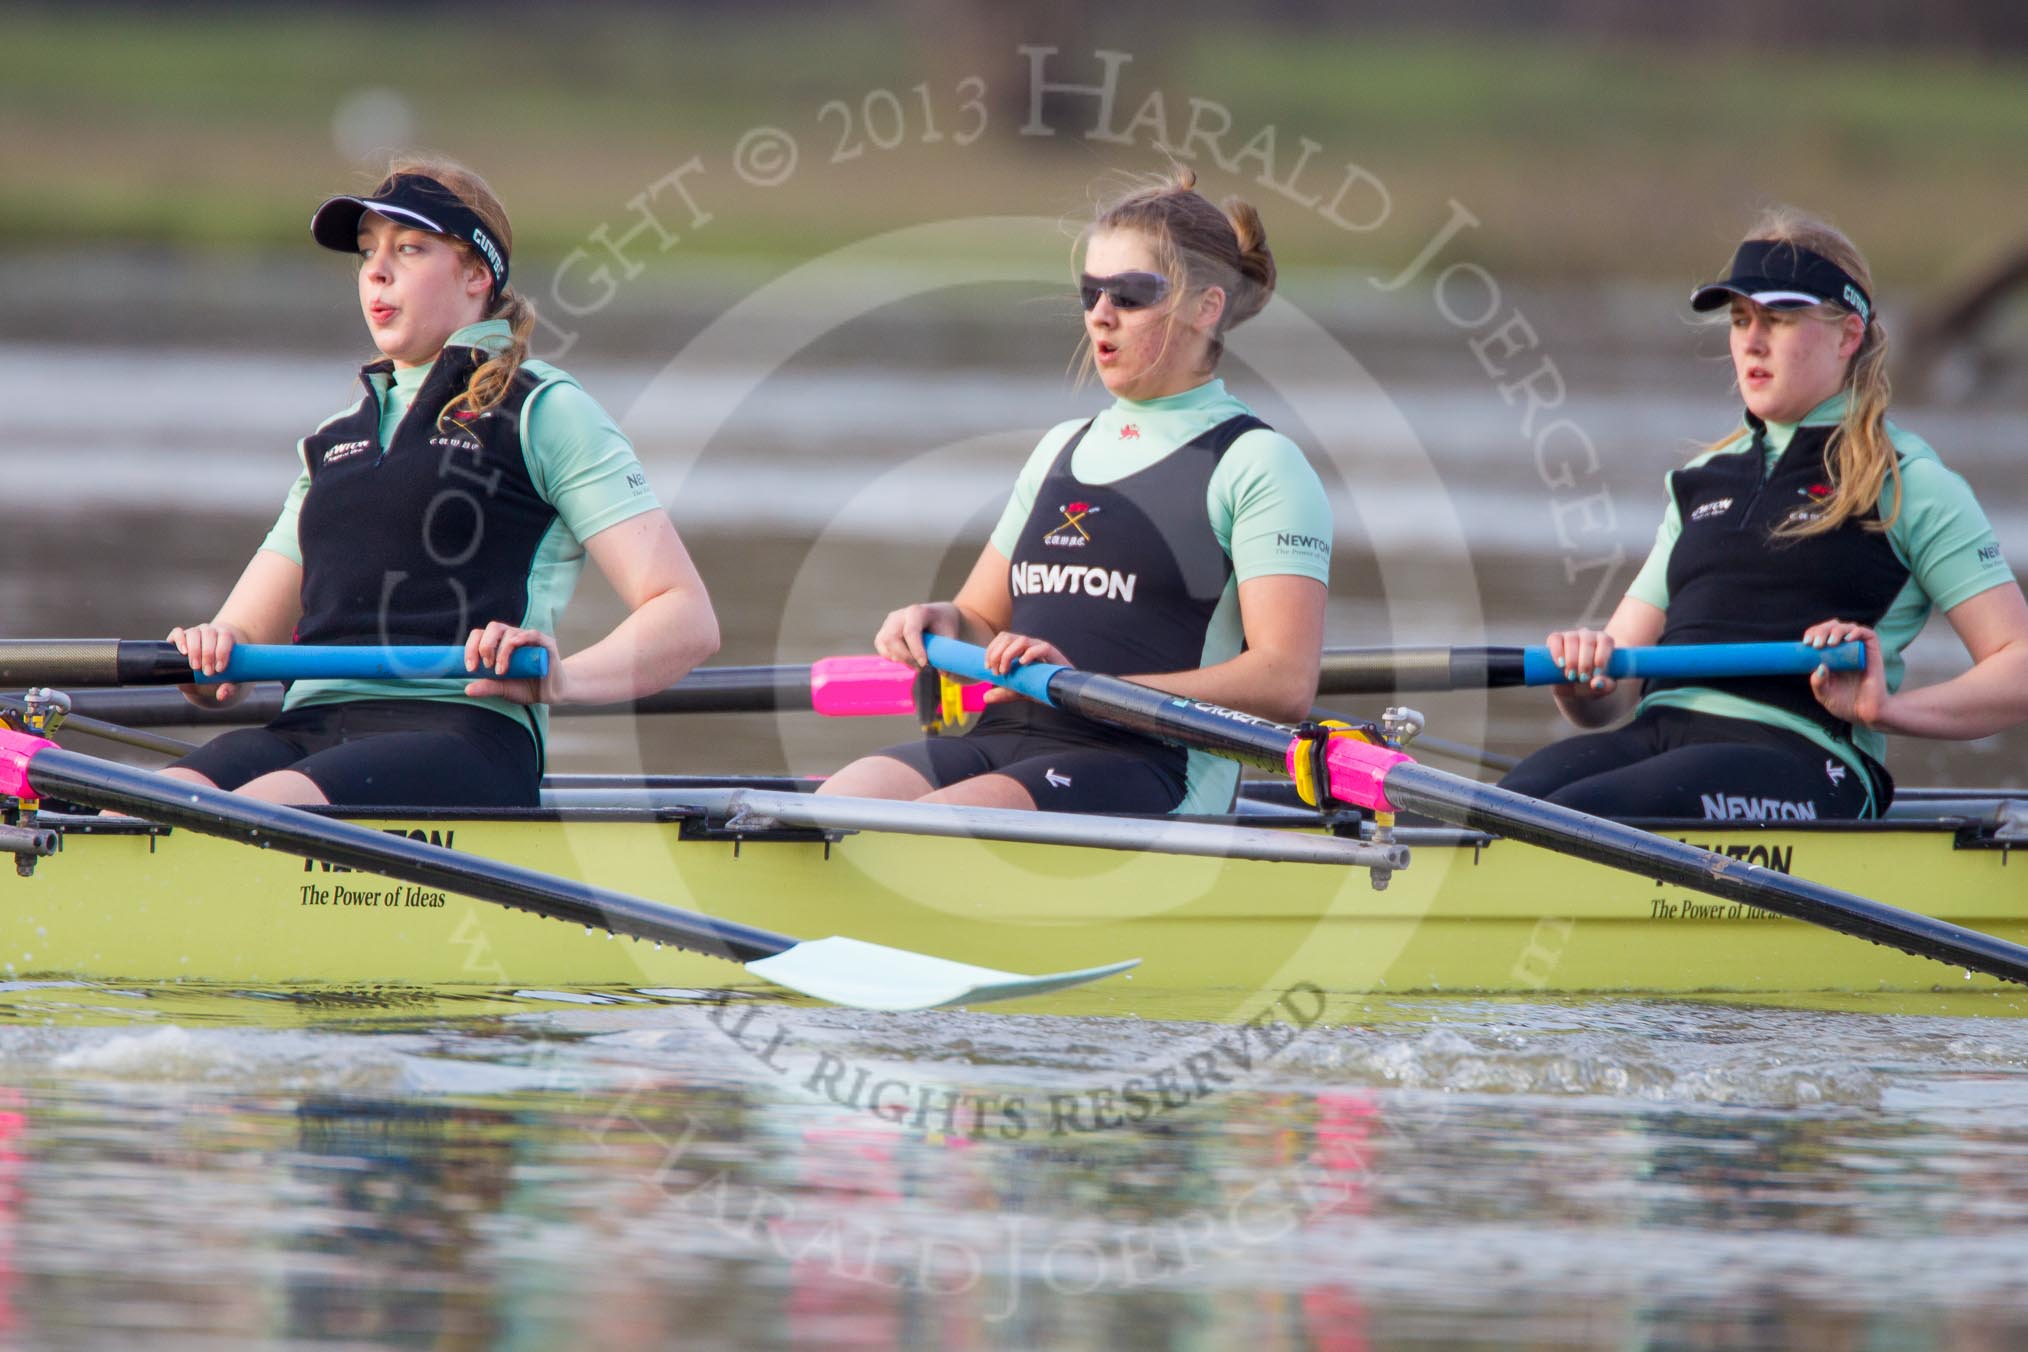 The Boat Race season 2013 - CUWBC training: In the CUWBC reserve boat Blondie in the 4 seat Lucy Griffin, 3 Rachel Boyd and 2 Ania Slotala..
River Thames near Remenham,
Henley-on-Thames,
Oxfordshire,
United Kingdom,
on 19 March 2013 at 16:07, image #115